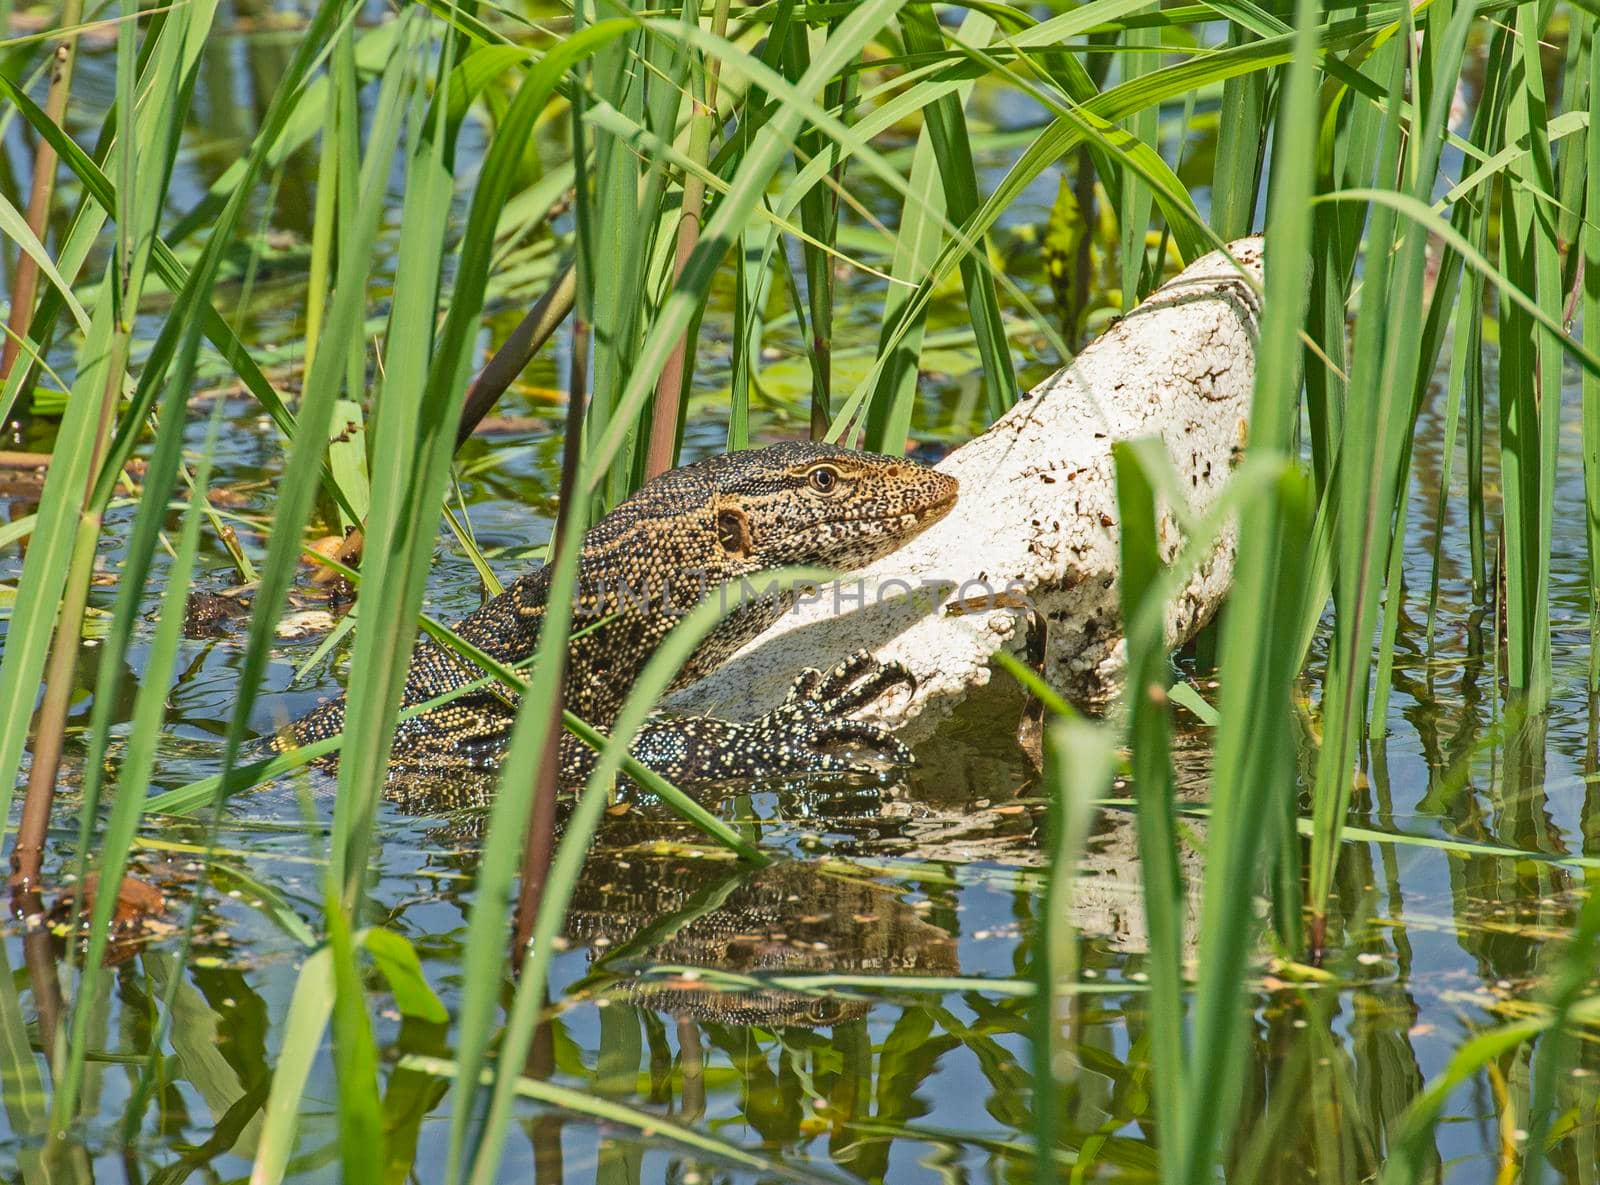 Nile monitor lizard varanus niloticus hiding on piece of polystyrene pollution by river bank wetland in grass reeds